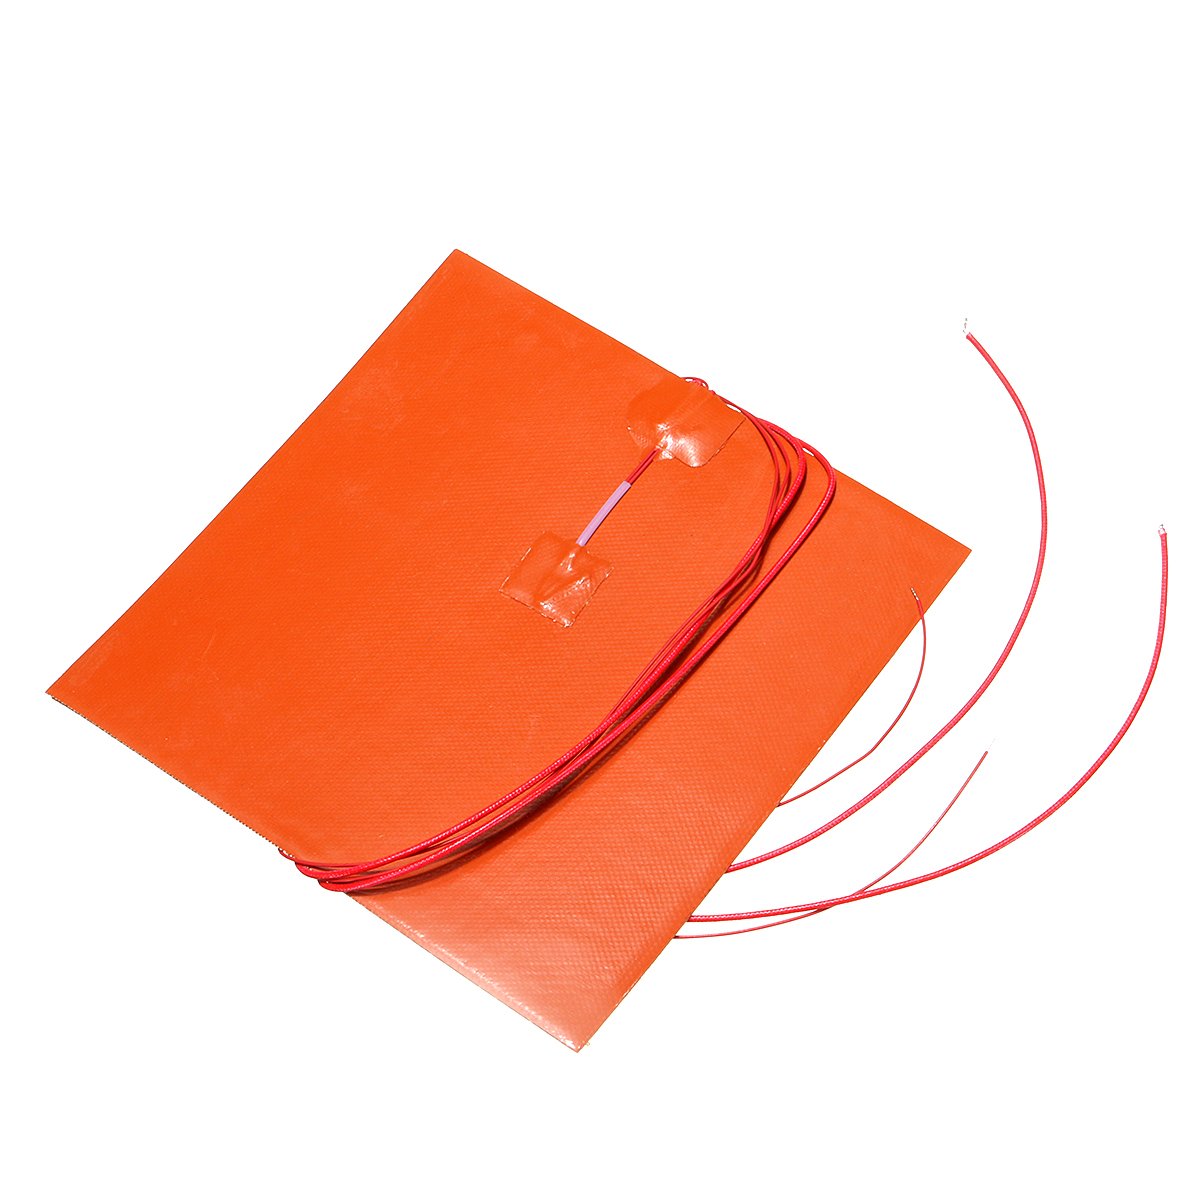 110V/220V 500W 200X200mm Thermistor Silicone Heated Bed Heating Pad for 3D Printer 2